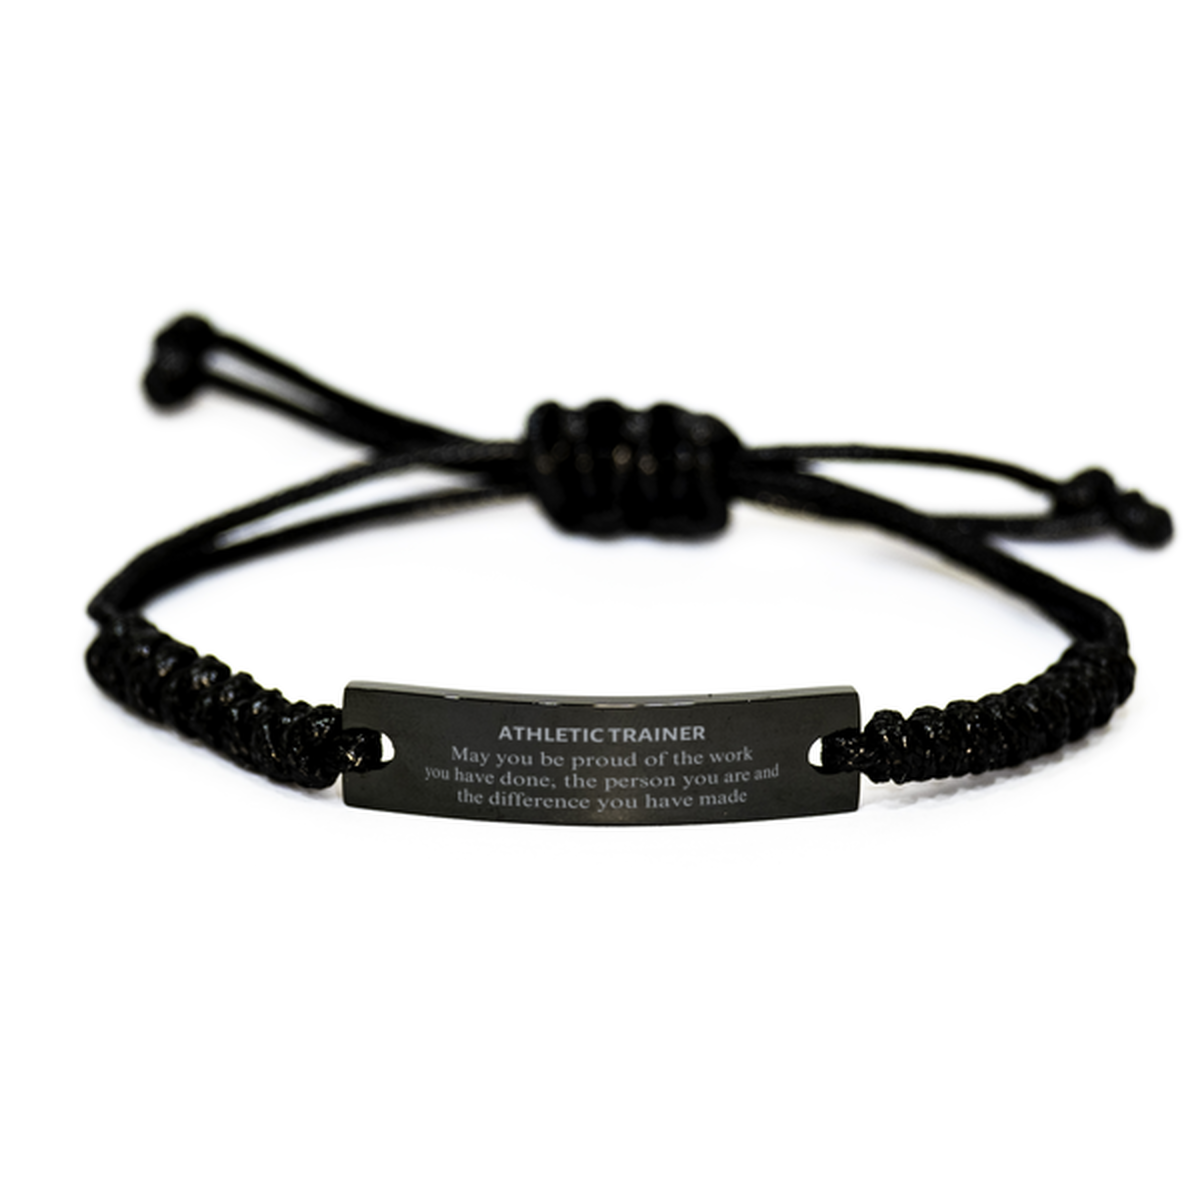 Athletic Trainer May you be proud of the work you have done, Retirement Athletic Trainer Black Rope Bracelet for Colleague Appreciation Gifts Amazing for Athletic Trainer